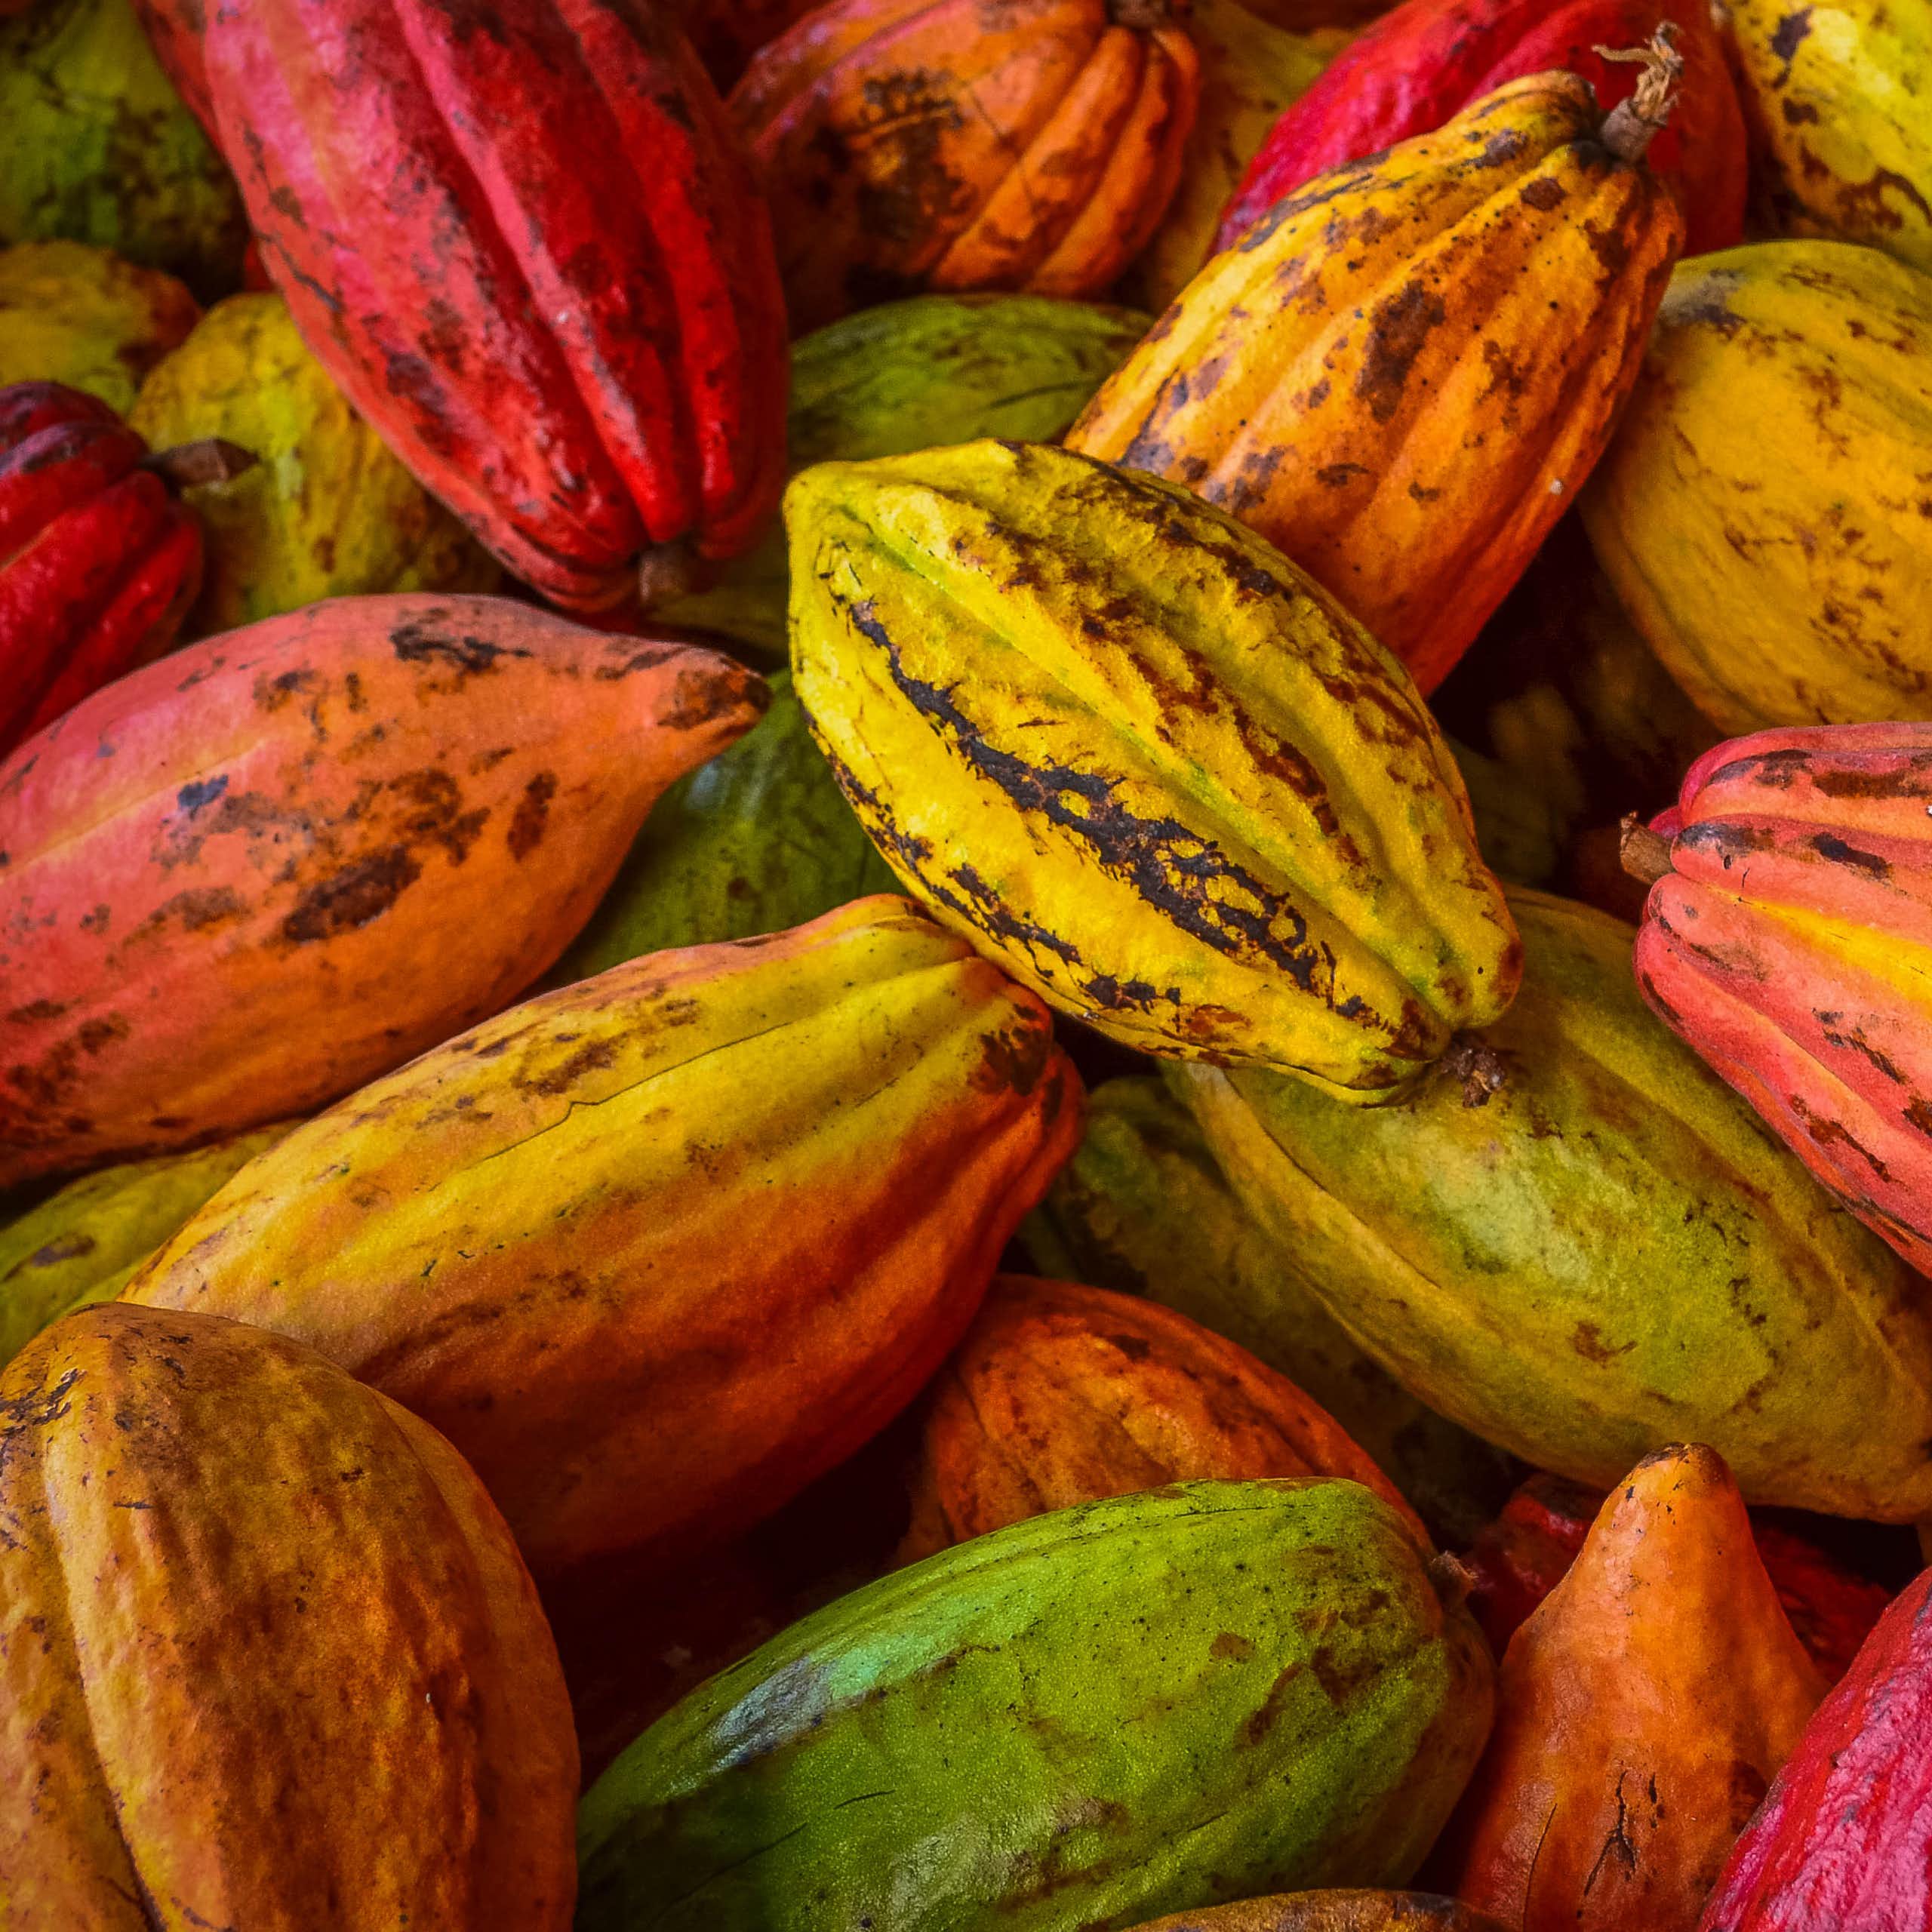 flatlay shot of brightly coloured (red green yellow) cacao pods in a pile